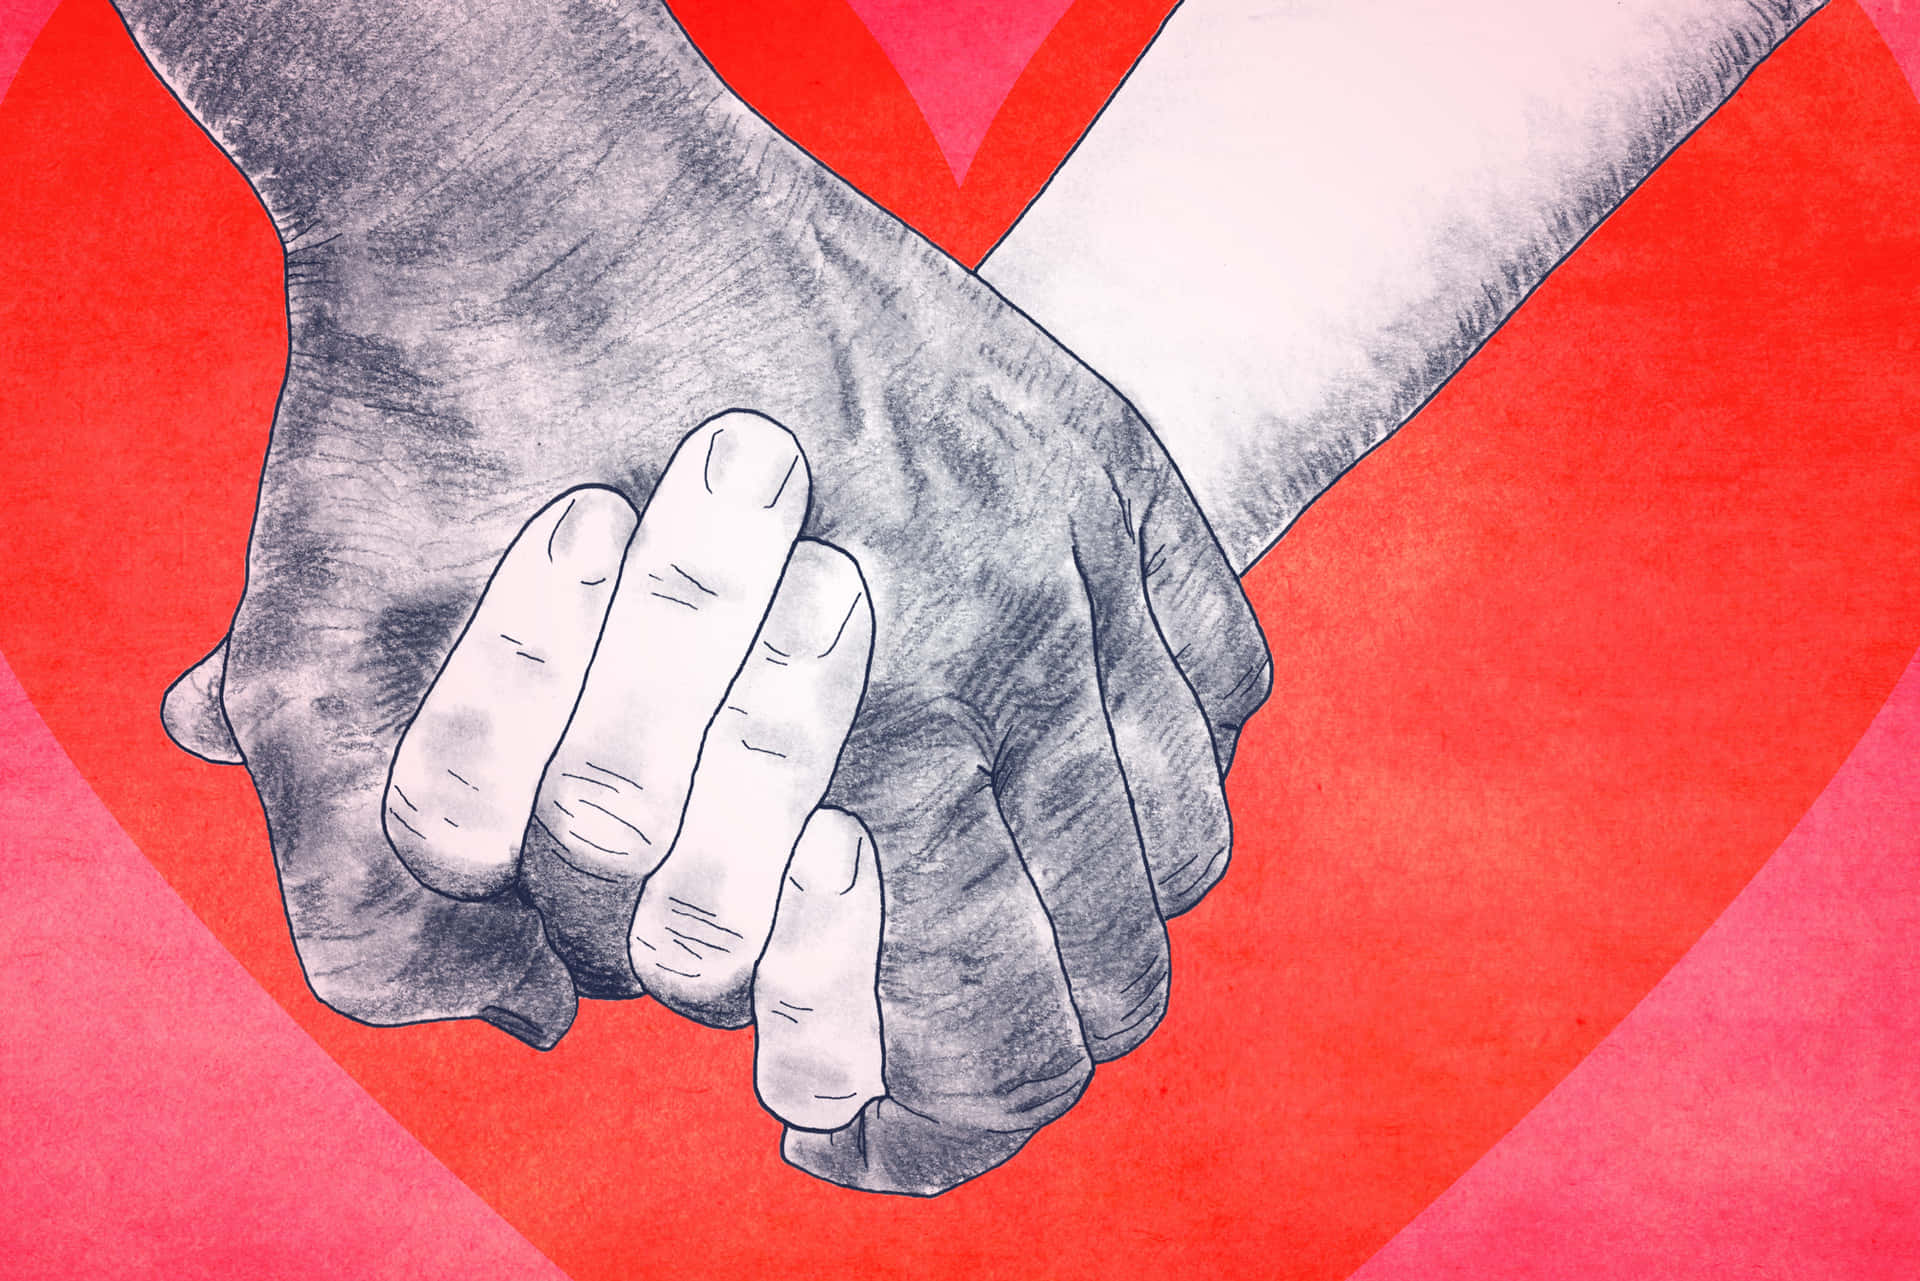 Show your love and appreciation by holding hands